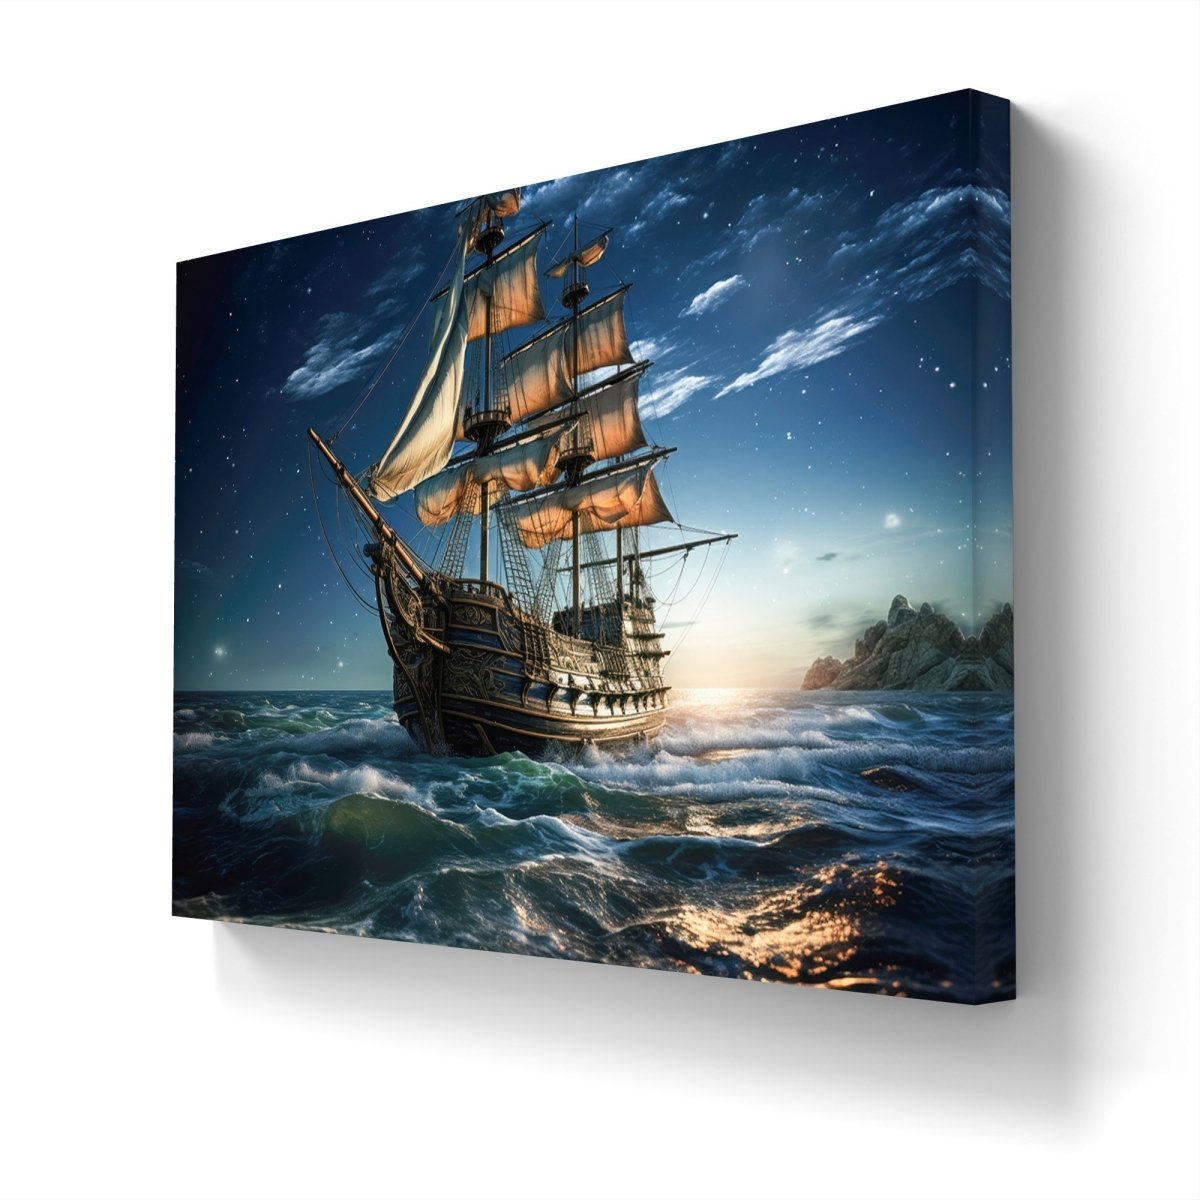 Pirate Ship at Sea Ai Illustration Canvas Print Picture Wall Art - SPC221 - Art Fever - Art Fever